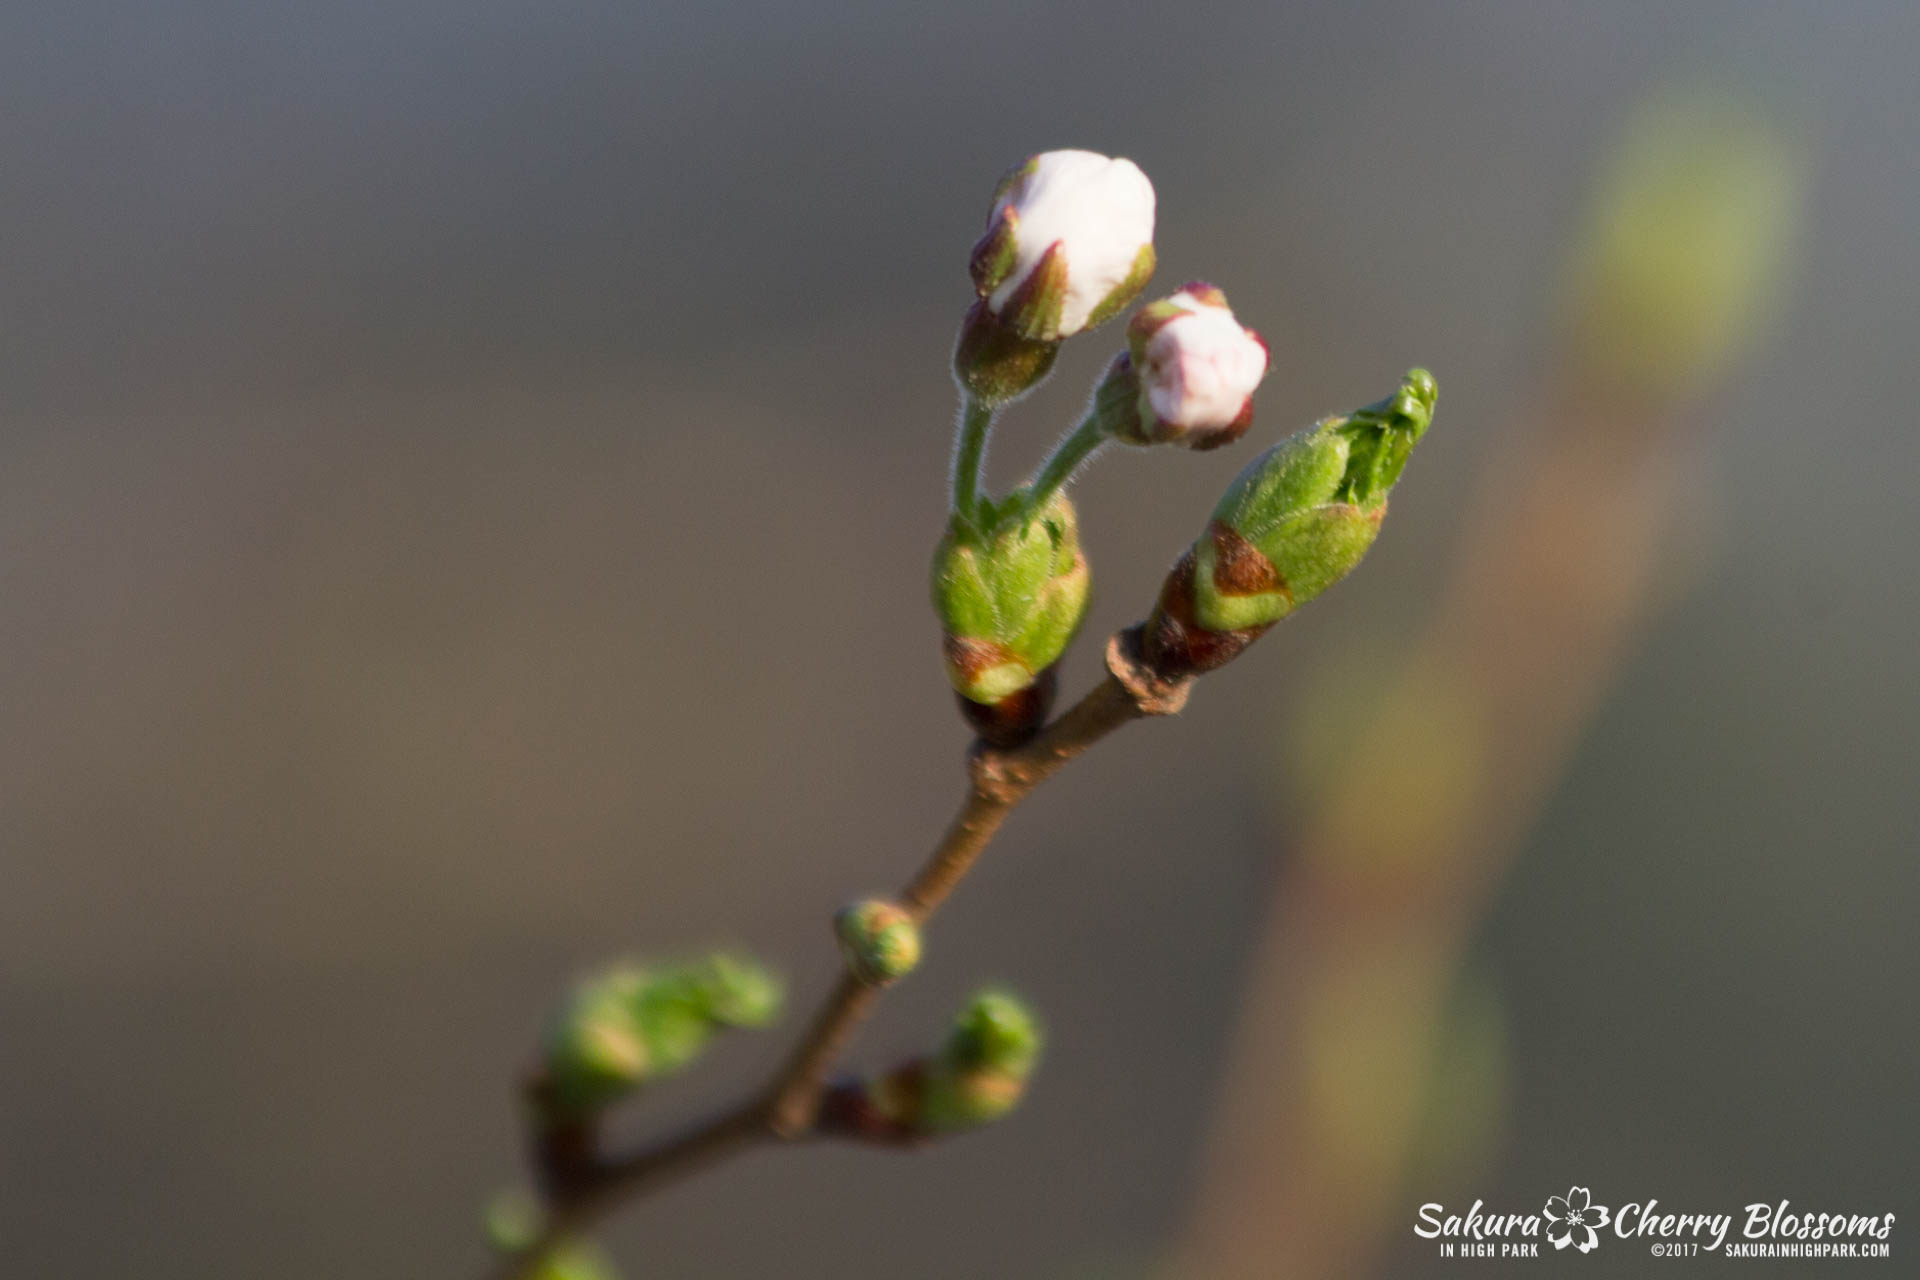 Sakura-in-High-Park-April-17-2017-florets-are-emerging-from-the-buds-throughout-the-park-44.jpg